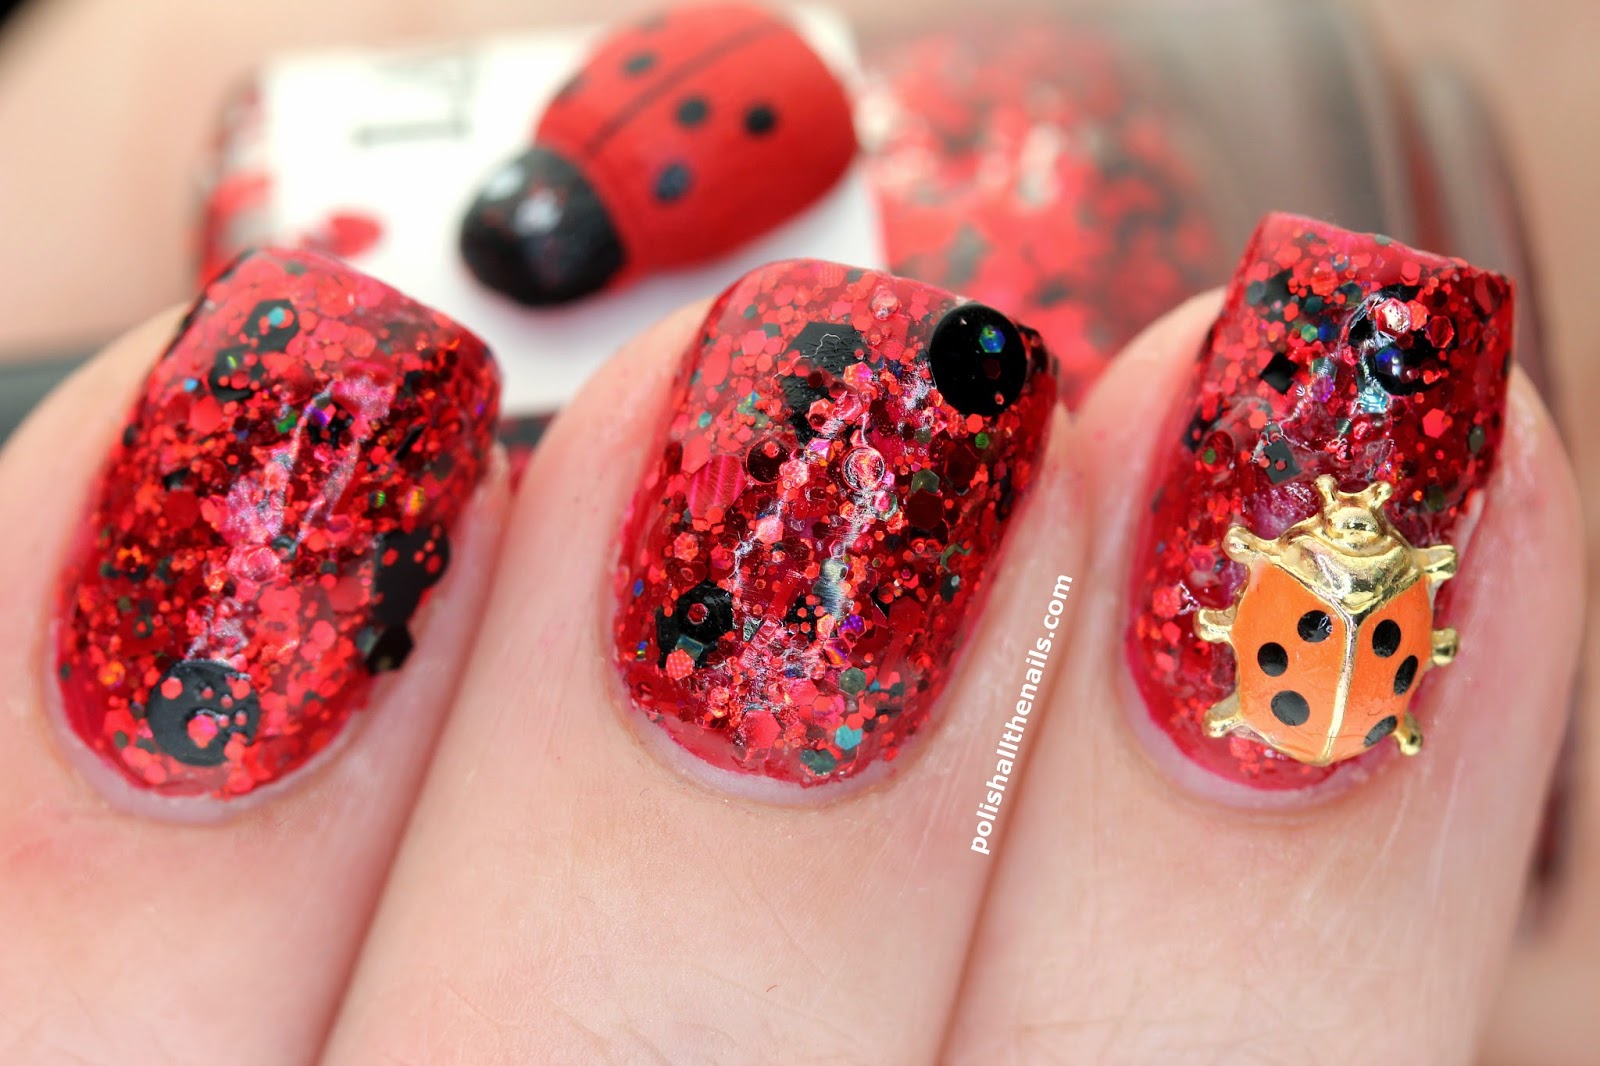 8. Ladybug Nail Art with Flowers - wide 7